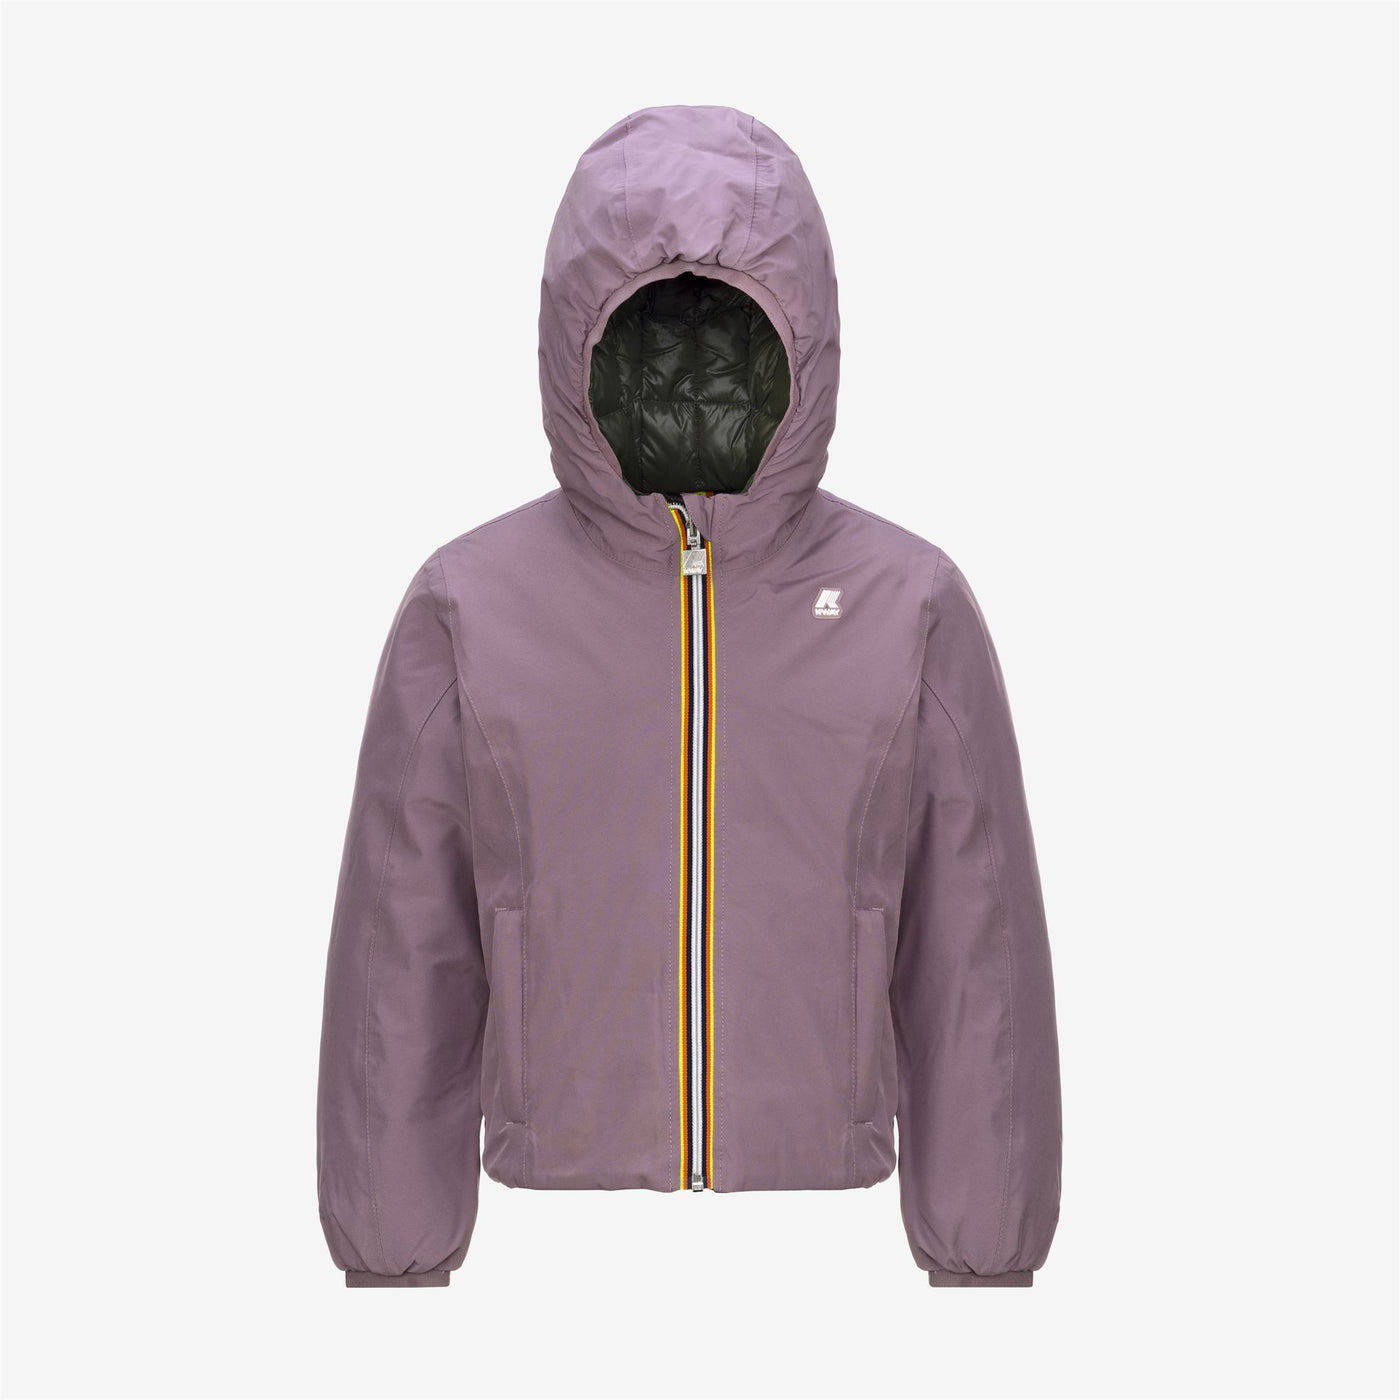 Jackets Girl P. LILY ST THERMO REVERSIBLE Short VIOLET DUSTY - GREEN BLACKISH Photo (jpg Rgb)			